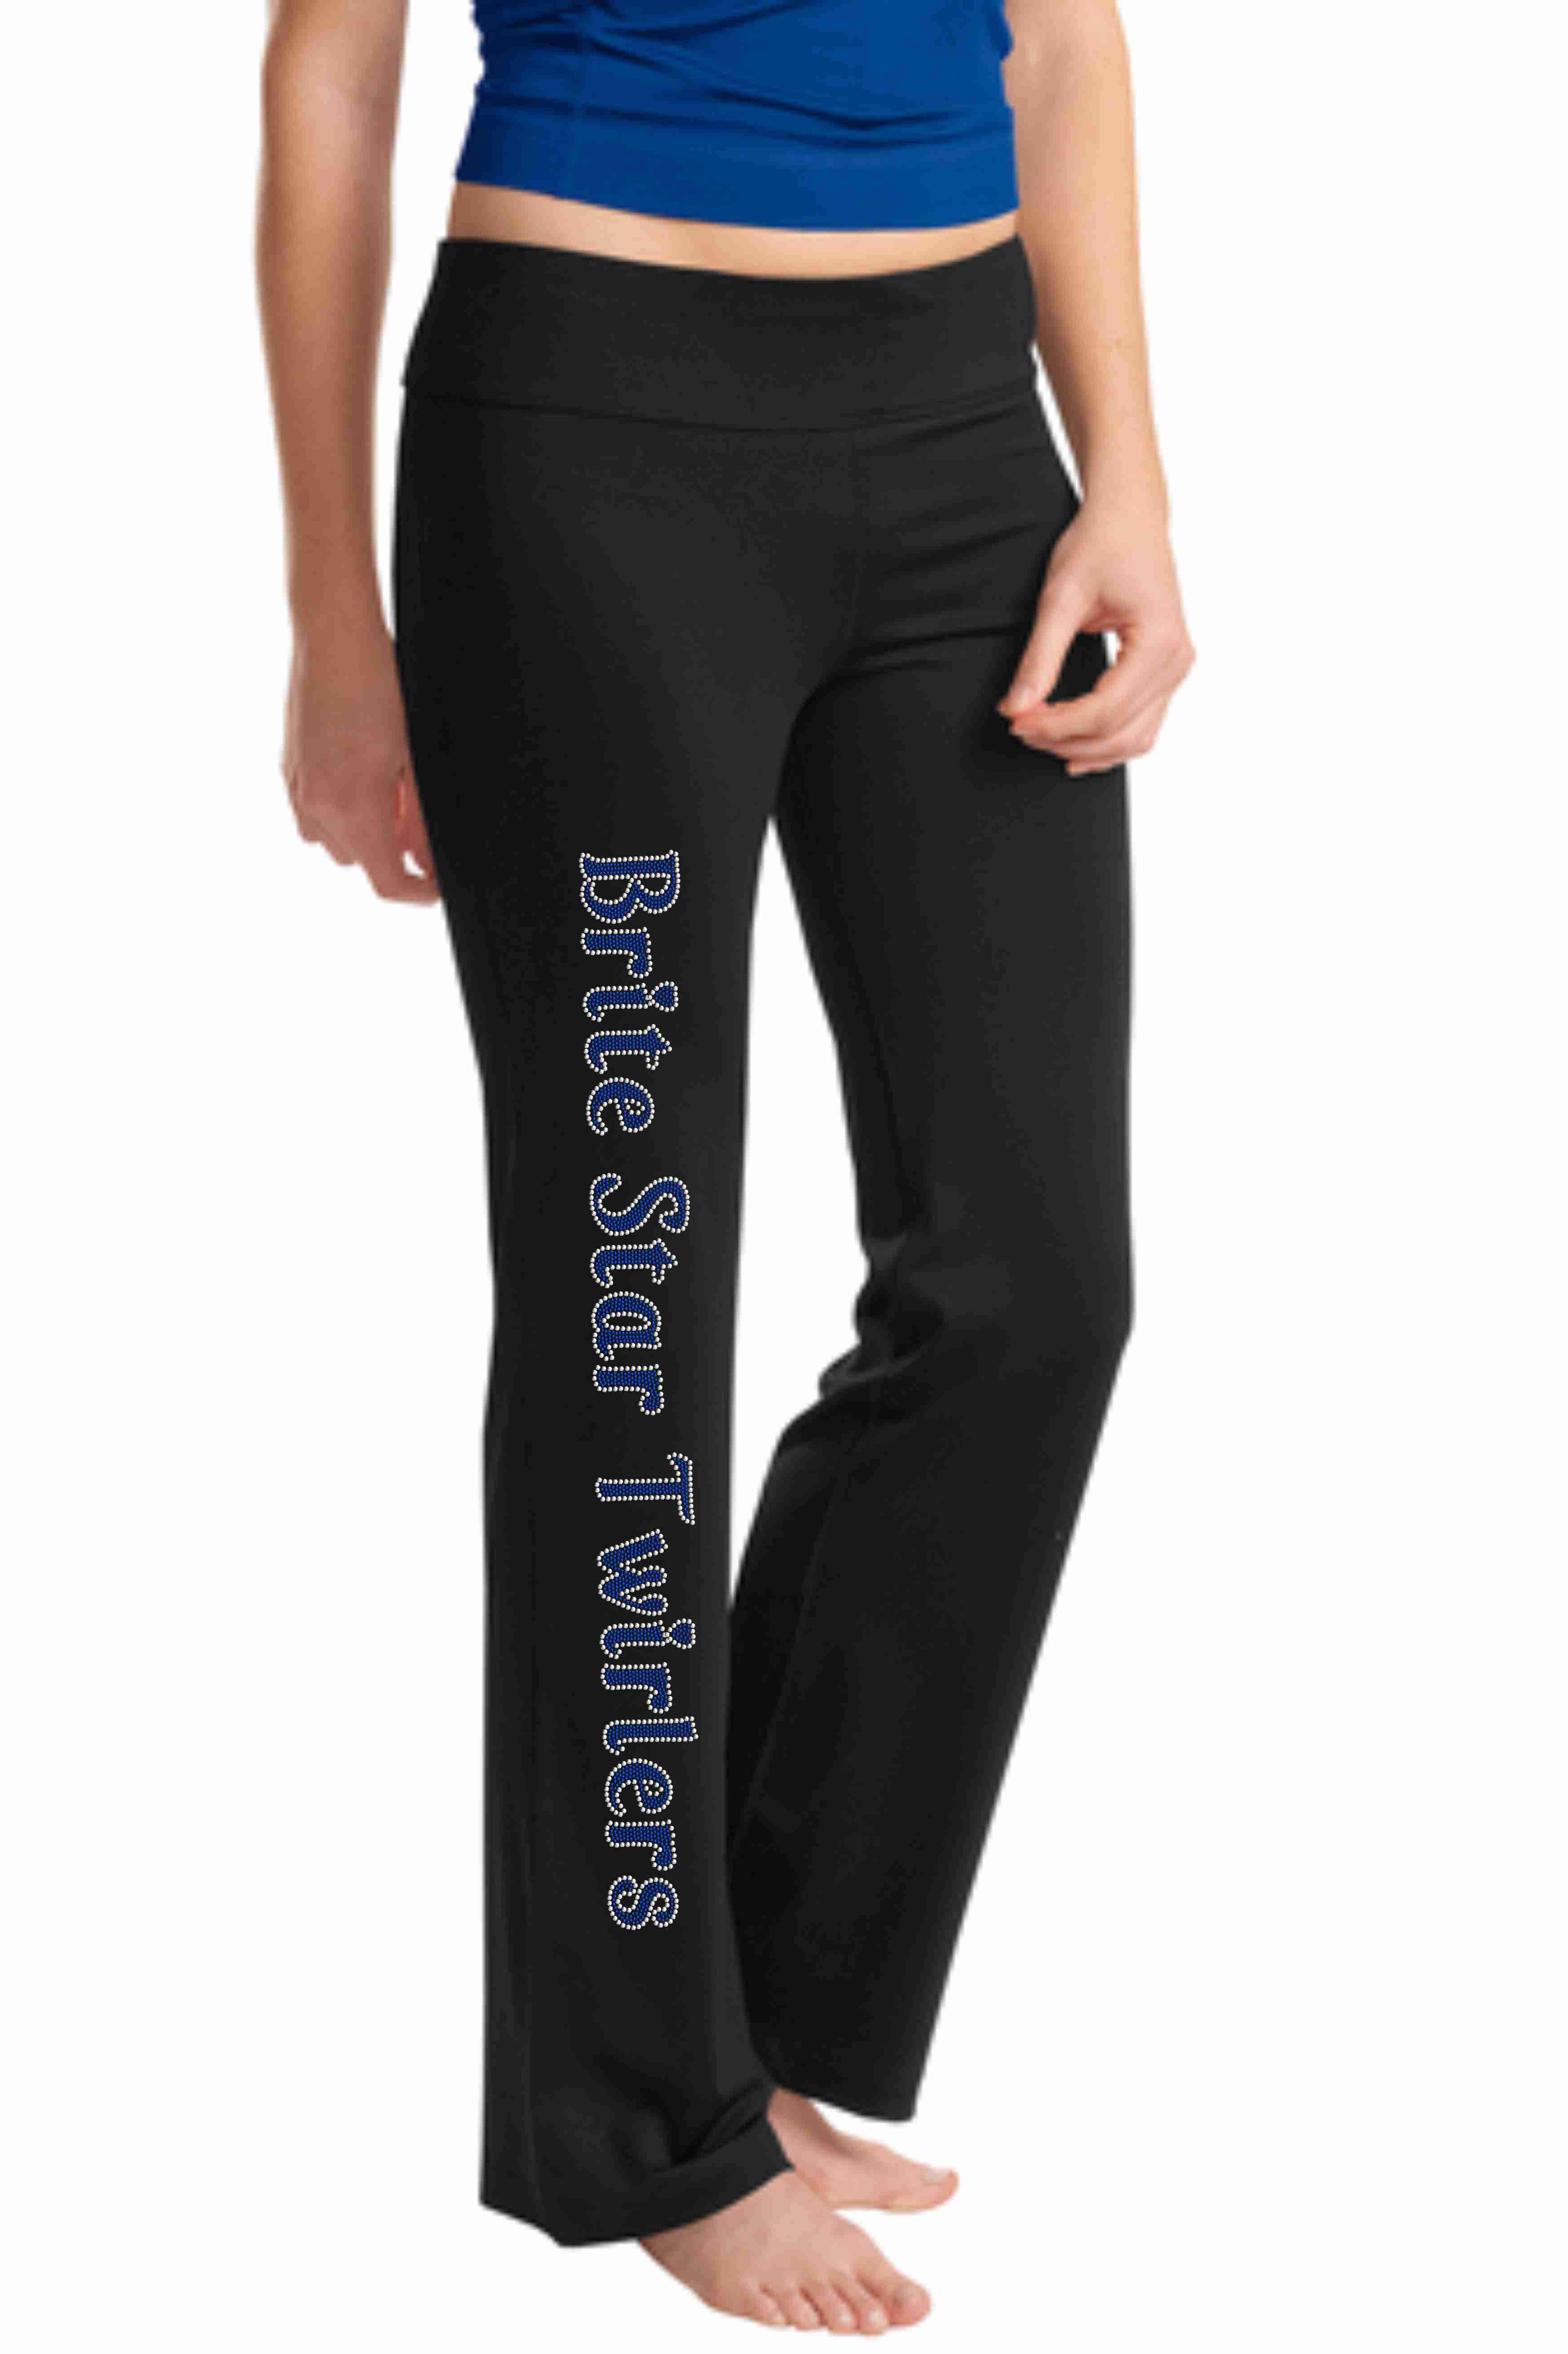 Brite Star Twirlers- Yoga Pants Yoga Pants Beckys-Boutique.com Extra Small 